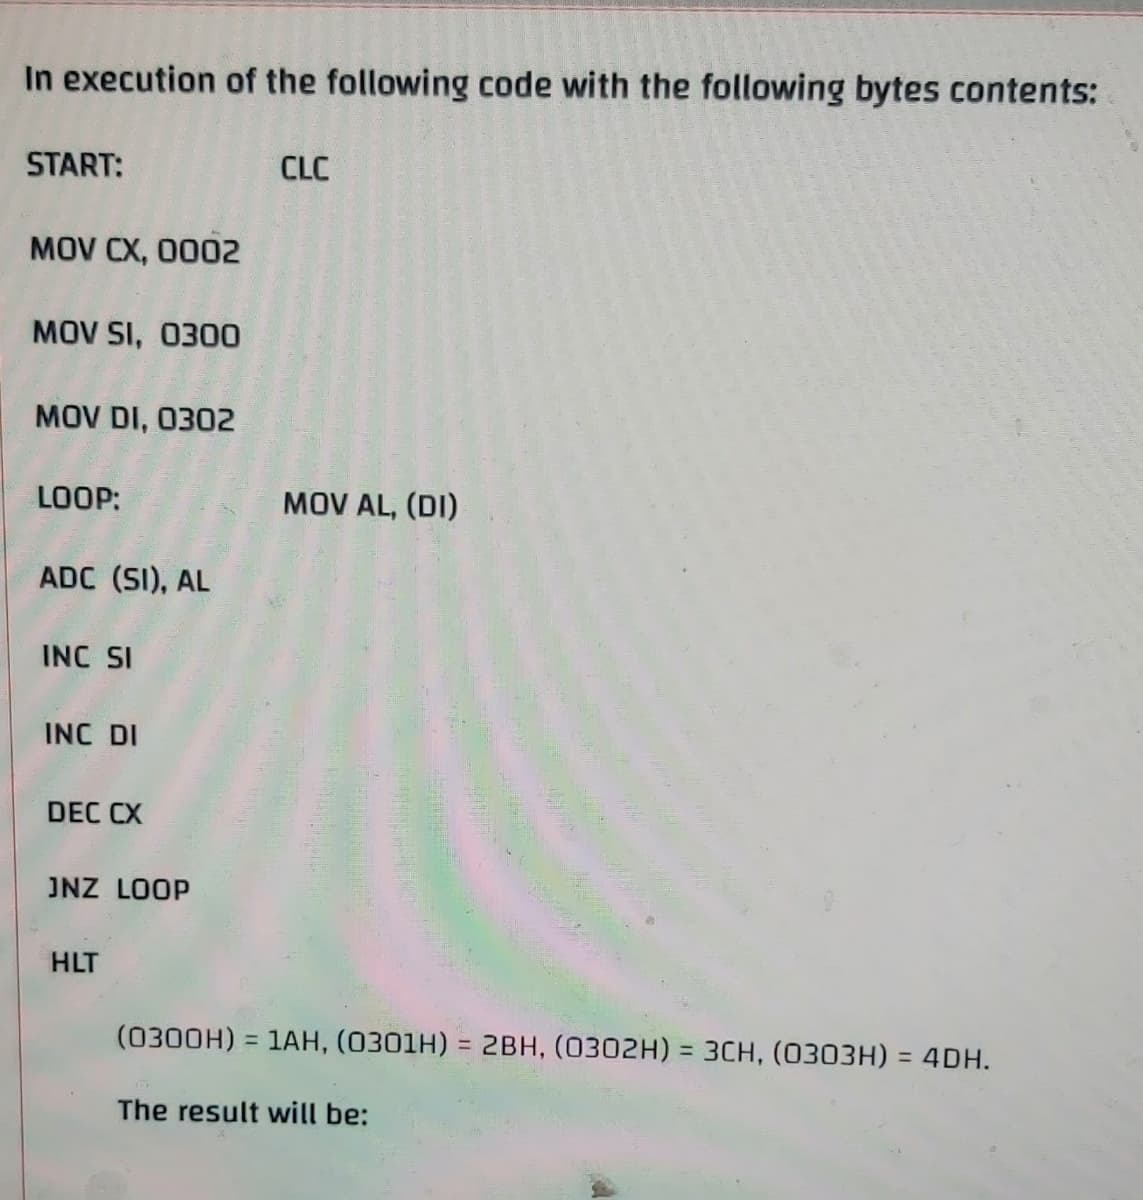 In execution of the following code with the following bytes contents:
START:
CLC
MOV CX, 0002
MOV SI, 0300
MOV DI, 0302
LOOP:
MOV AL, (DI)
ADC (SI), AL
INC SI
INC DI
DEC CX
JNZ LOOP
HLT
(0300H) = 1AH, (0301H) = 2BH, (0302H) = 3CH, (0303H) = 4DH.
%3D
%3D
%3D
The result will be:
